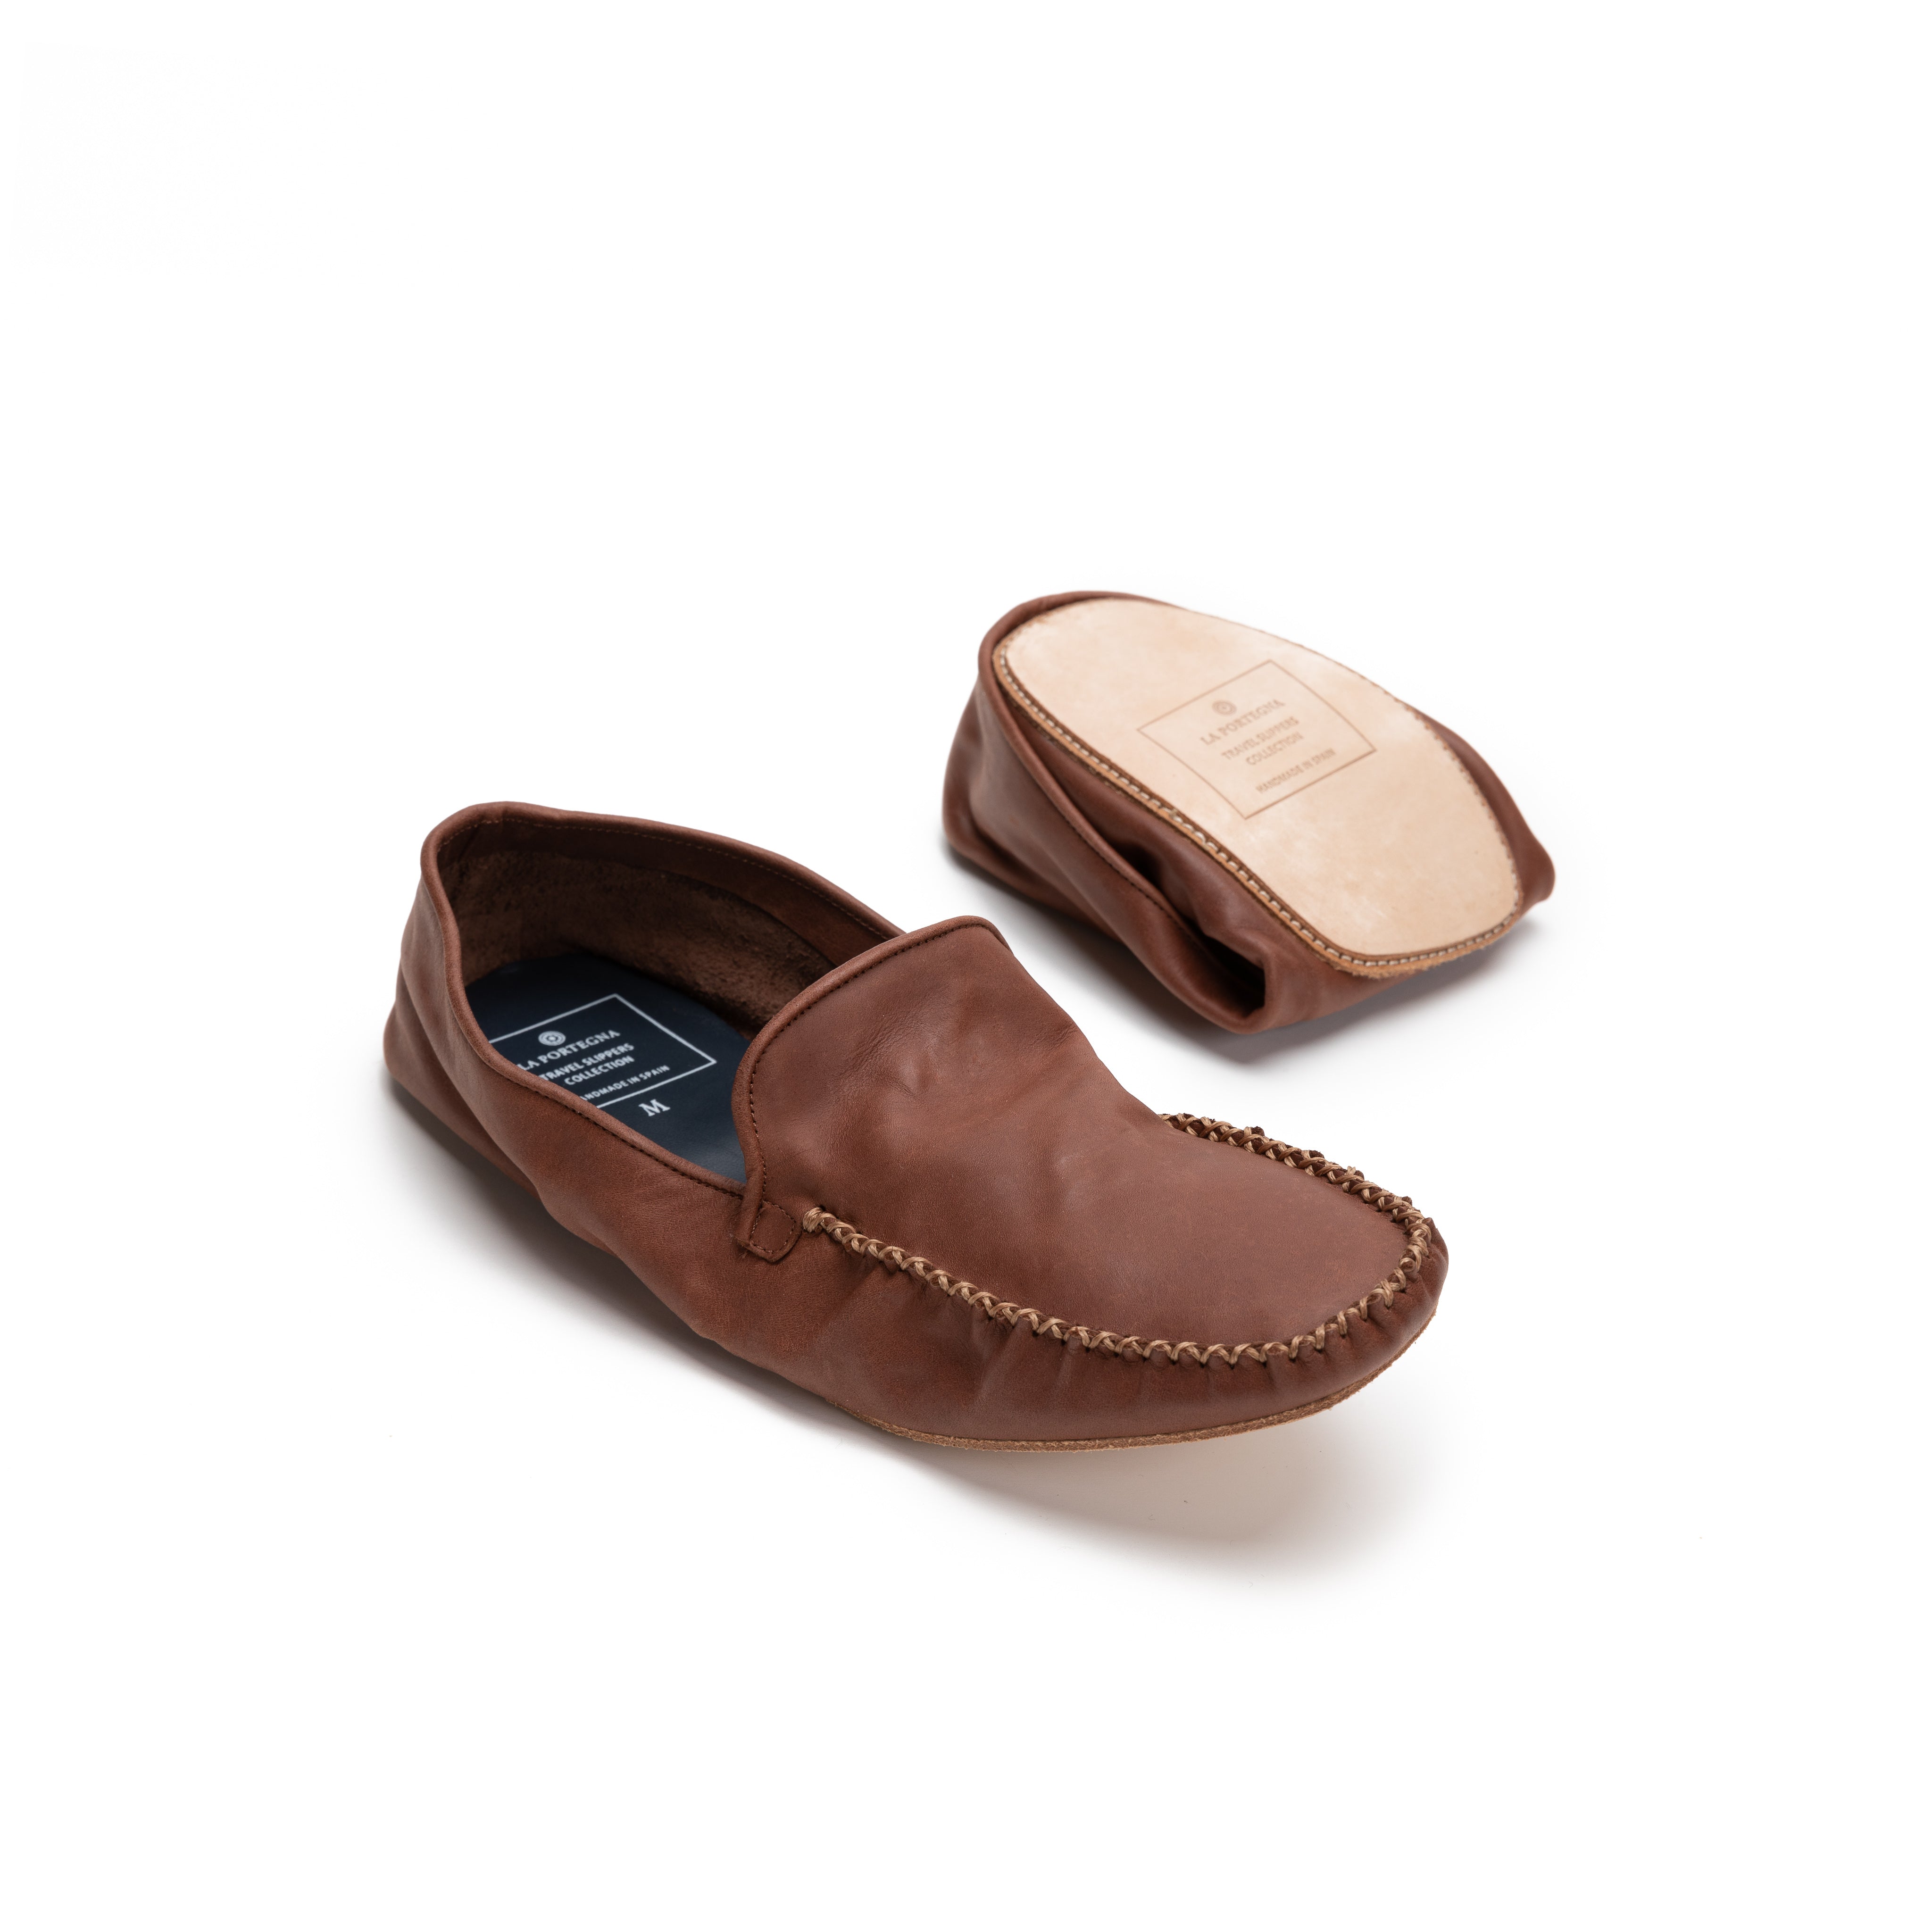 soleless moccasin slippers